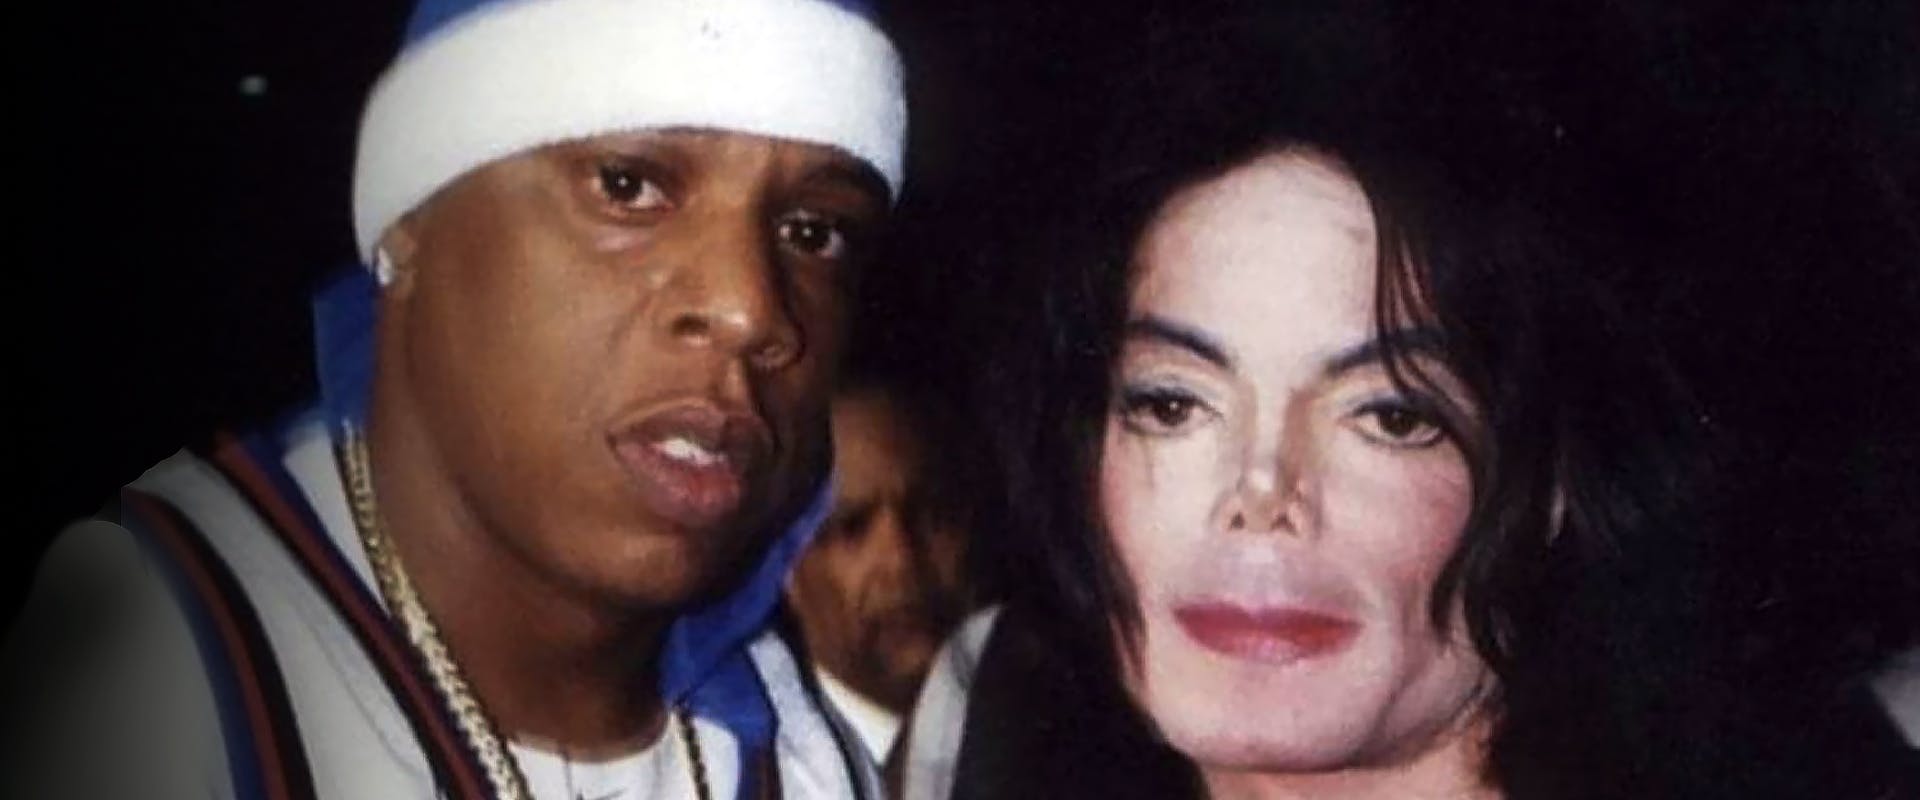 JAY-Z and MICHAEL JACKSON at Hot 97's Summer Jam, June 28, 2001